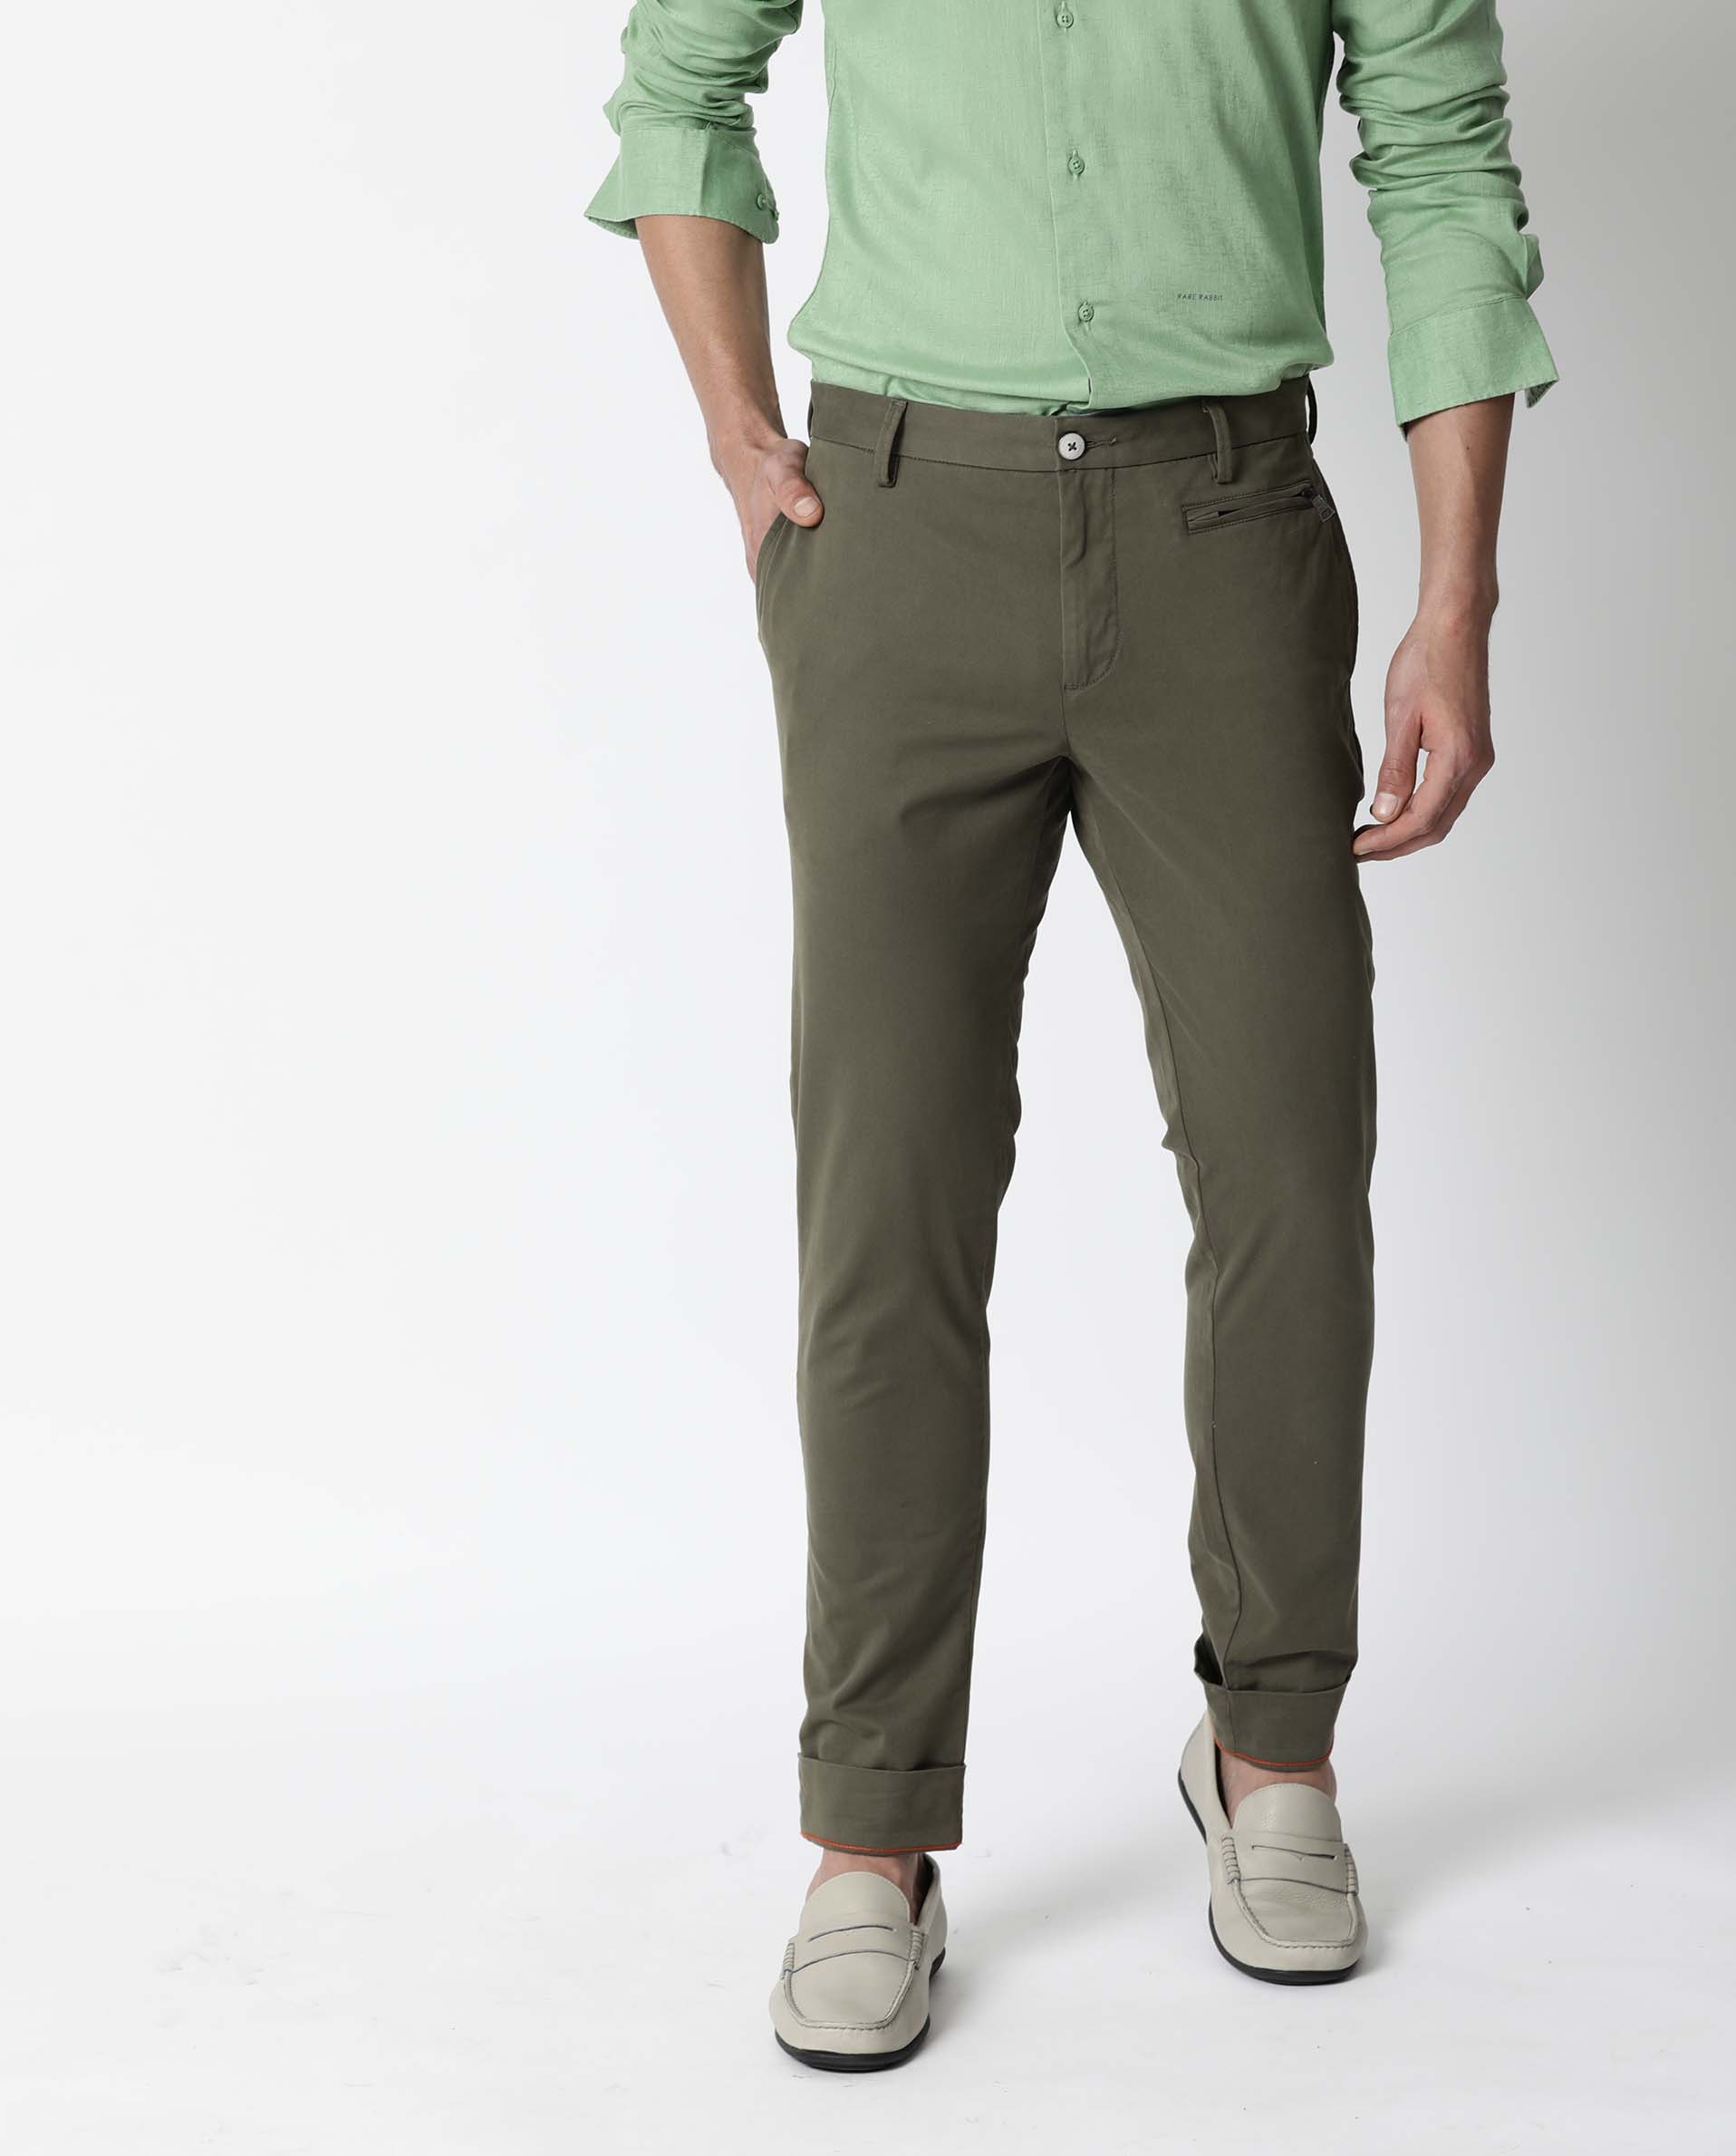 Summer Cotton Stretch Casual Pants For Men Korean Casual Slim Fit Joggers  With Elastic Waist In Light Yellow And Grey From Coralineny, $13.91 |  DHgate.Com